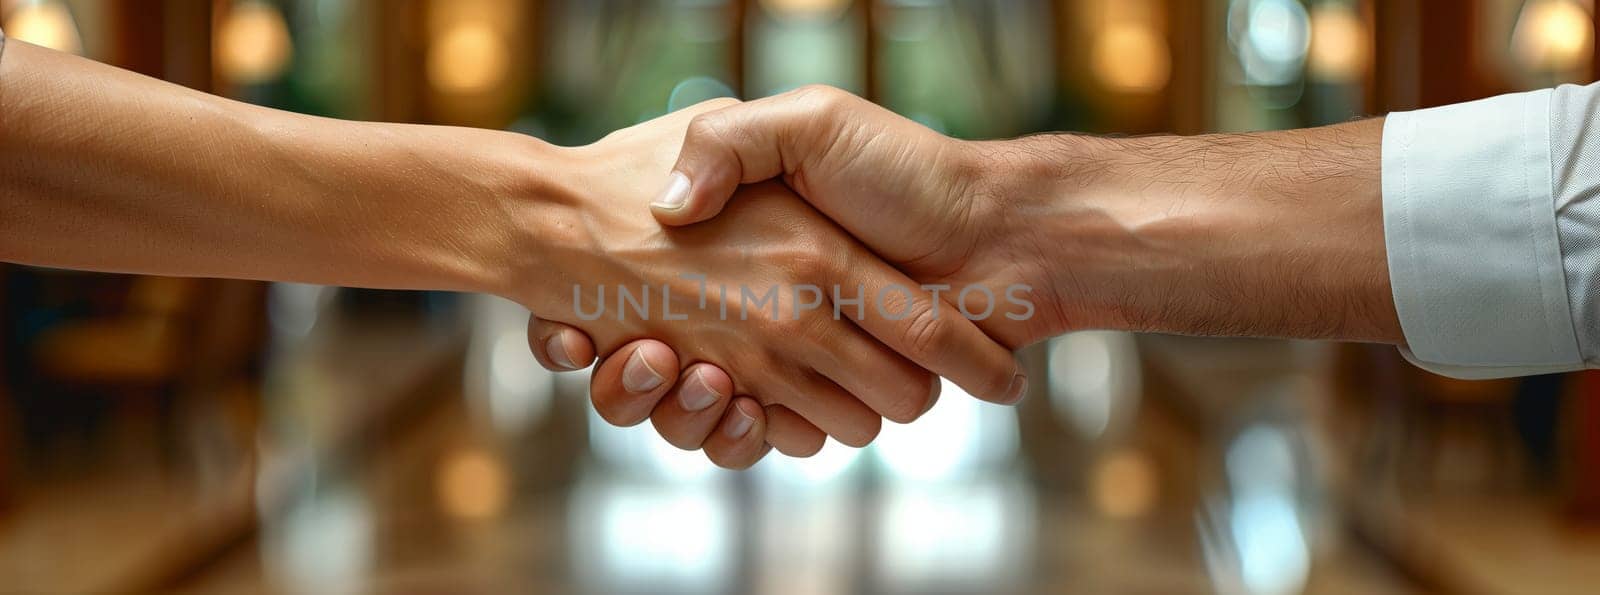 A man and a woman are politely shaking hands in a room, their fingers intertwining while sharing a firm grip. The womans nail color is electric blue